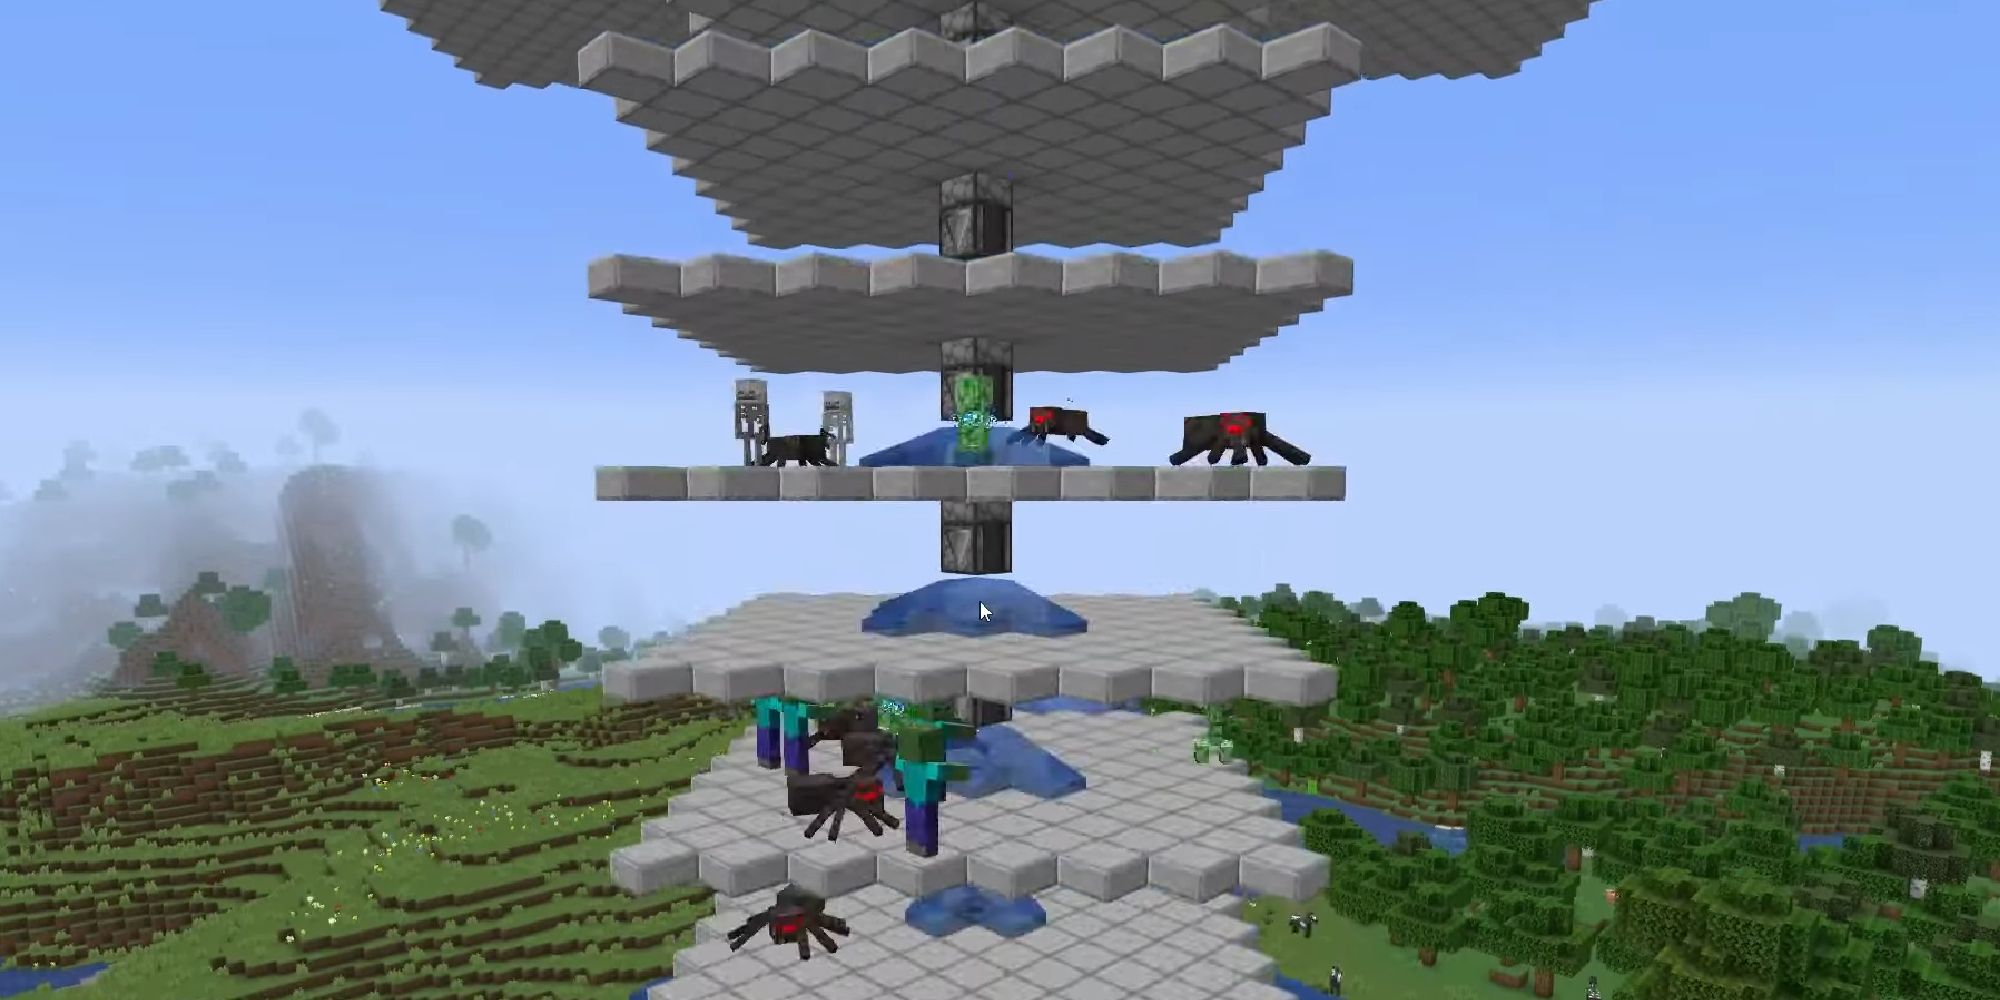 Minecraft Automatic Mob Farm With Multiple Platforms In The Sky Spawning Spiders And Zombies